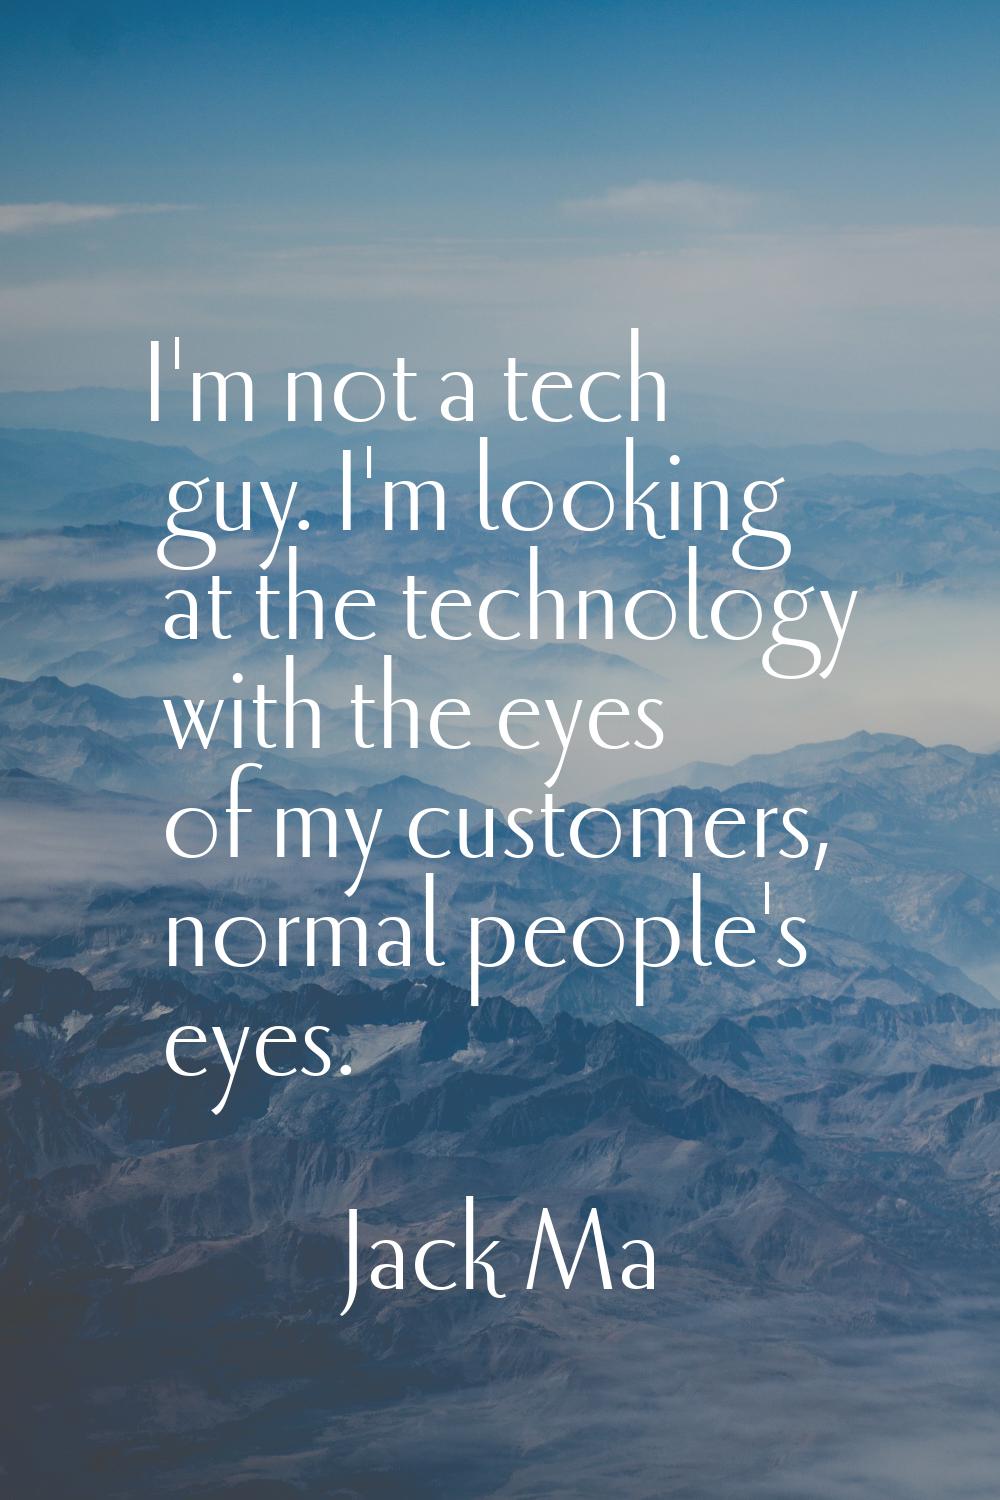 I'm not a tech guy. I'm looking at the technology with the eyes of my customers, normal people's ey